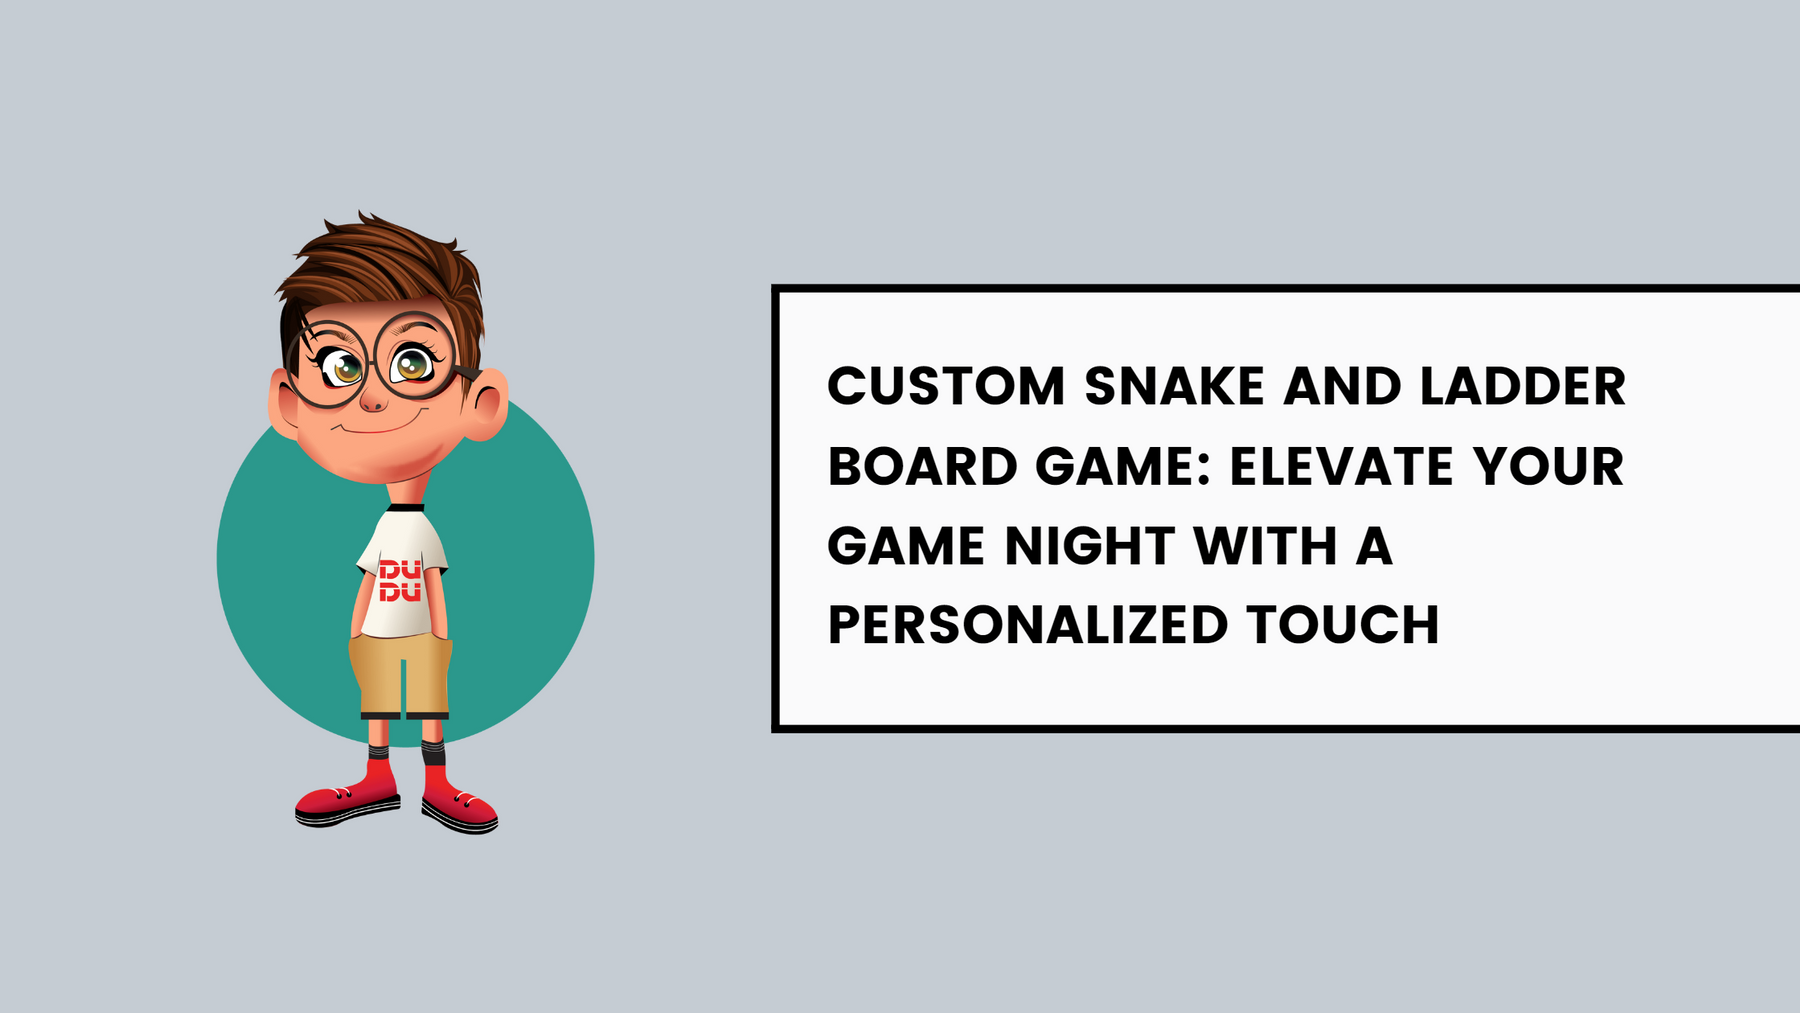 Custom Snake and Ladder Board Game: Elevate Your Game Night with a Personalized Touch